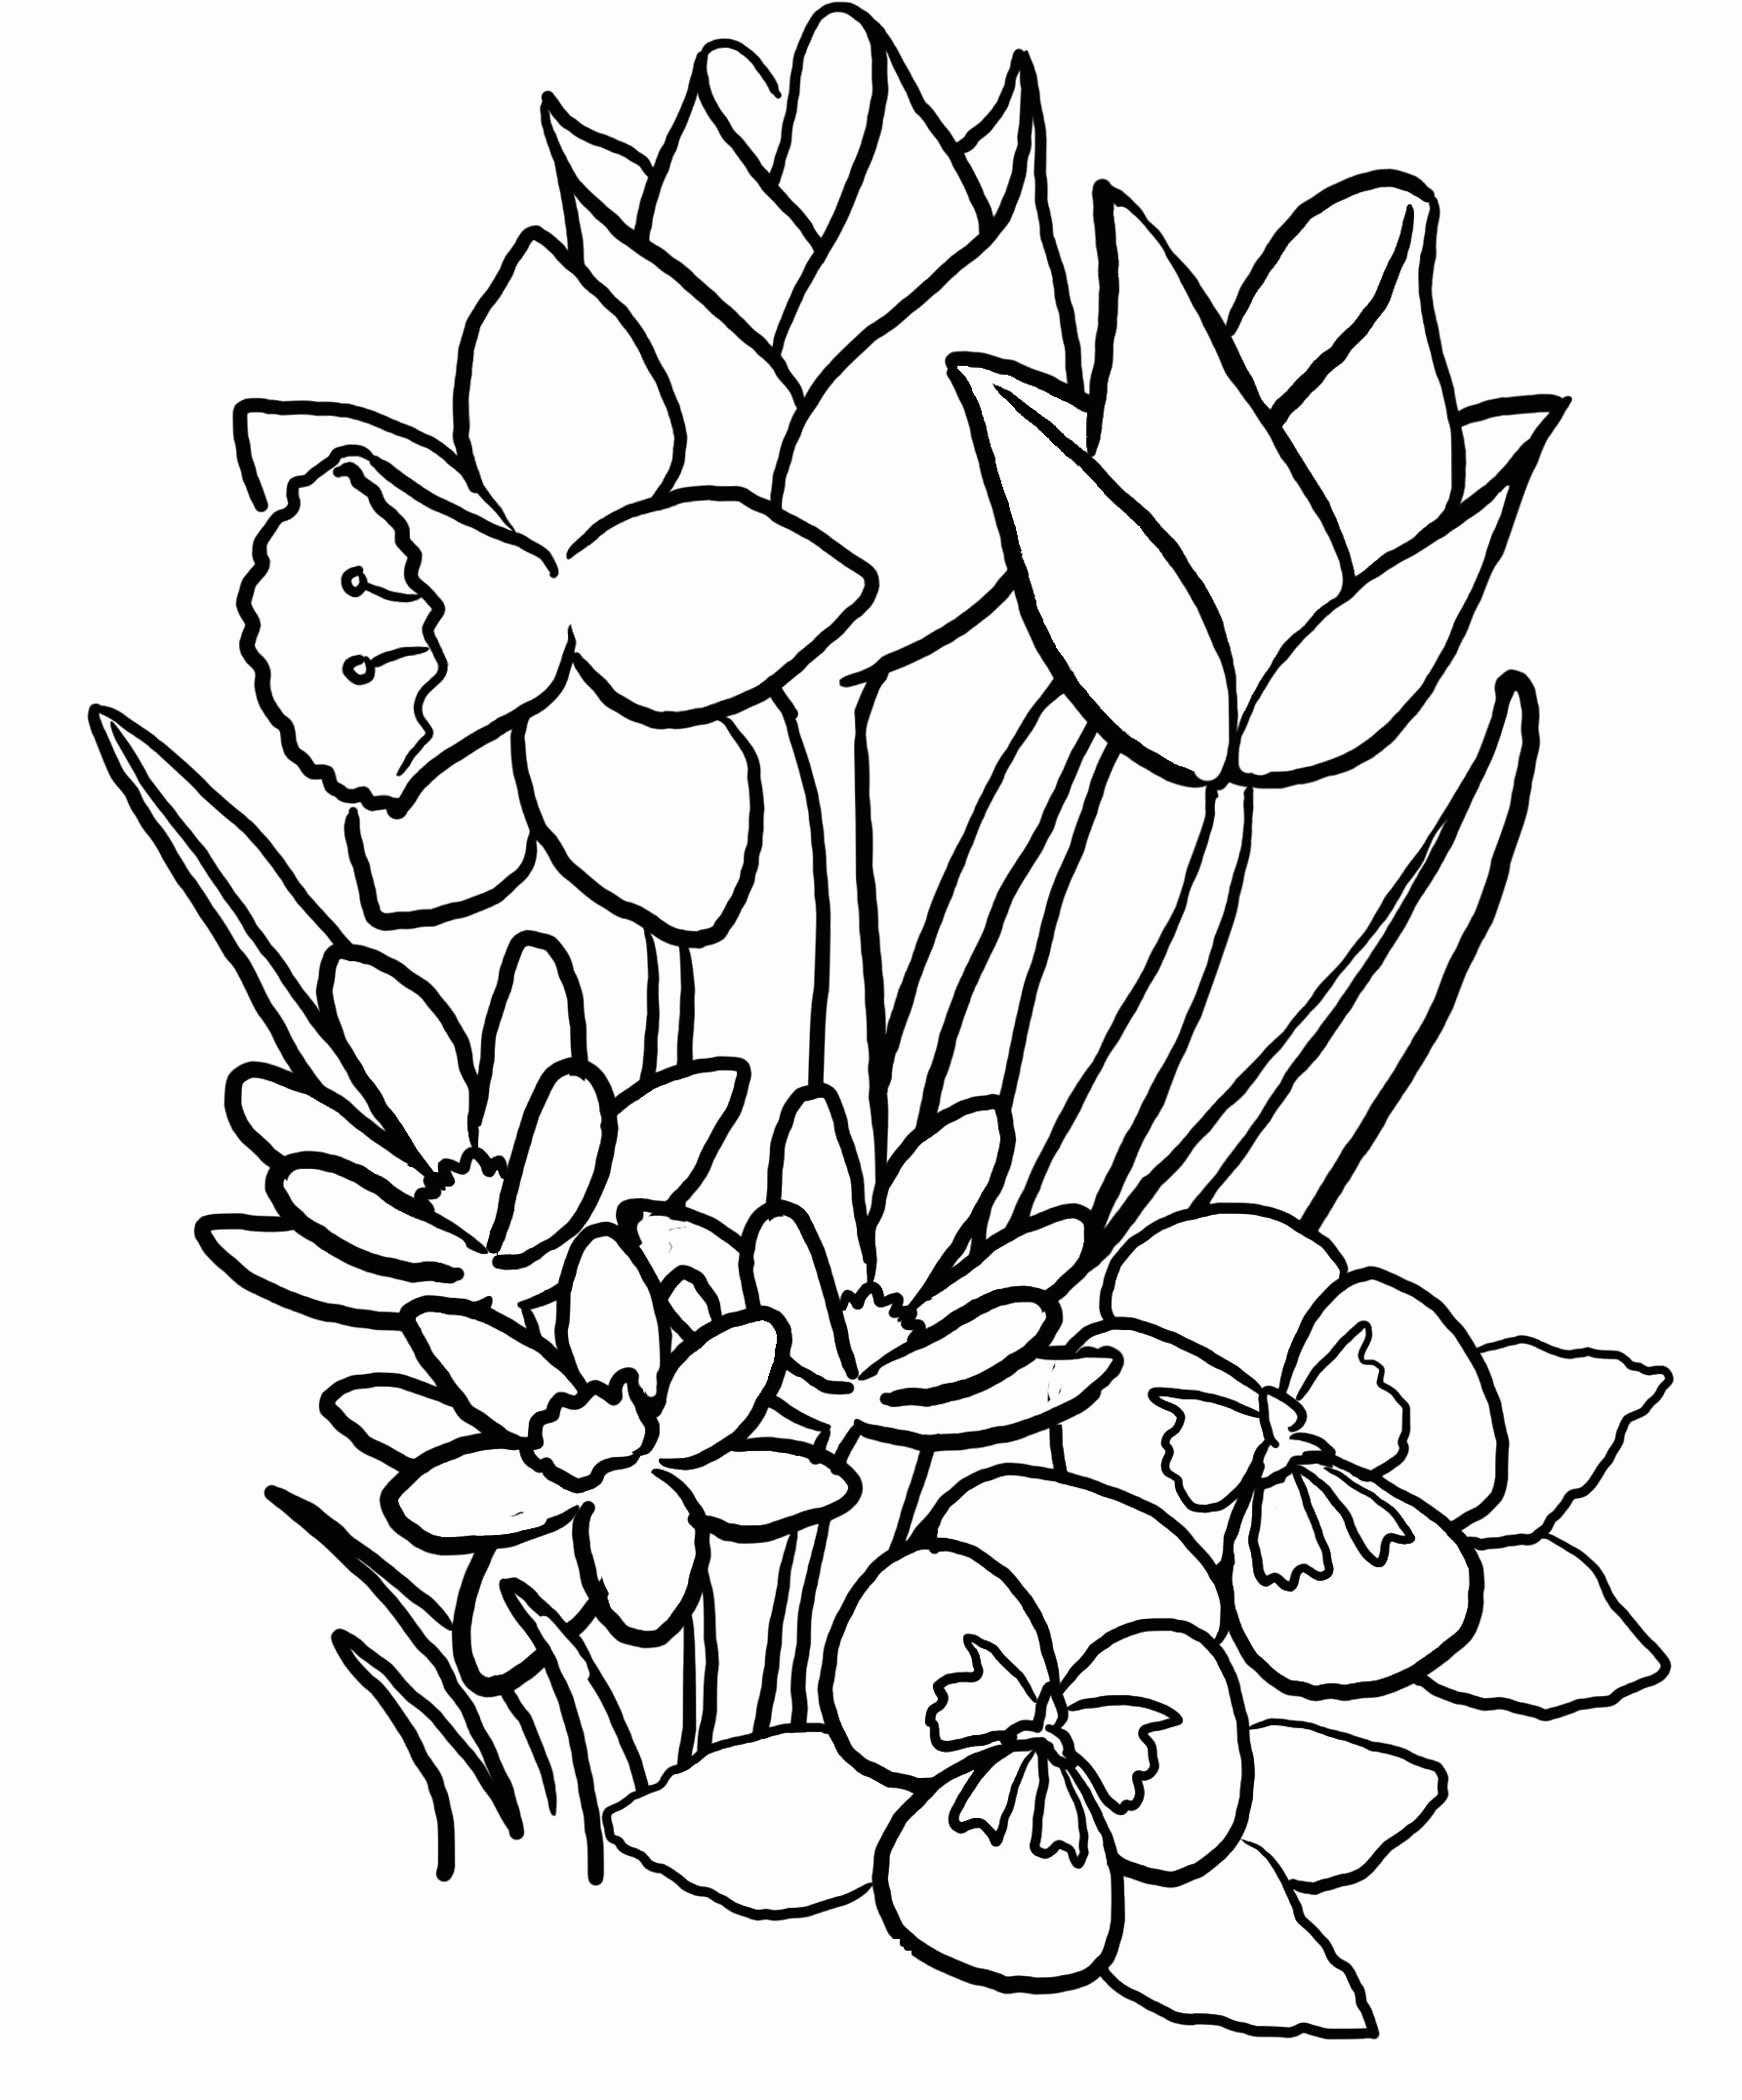 Printable Coloring Pages Of Hawaiian Flowers - AZ Coloring Pages